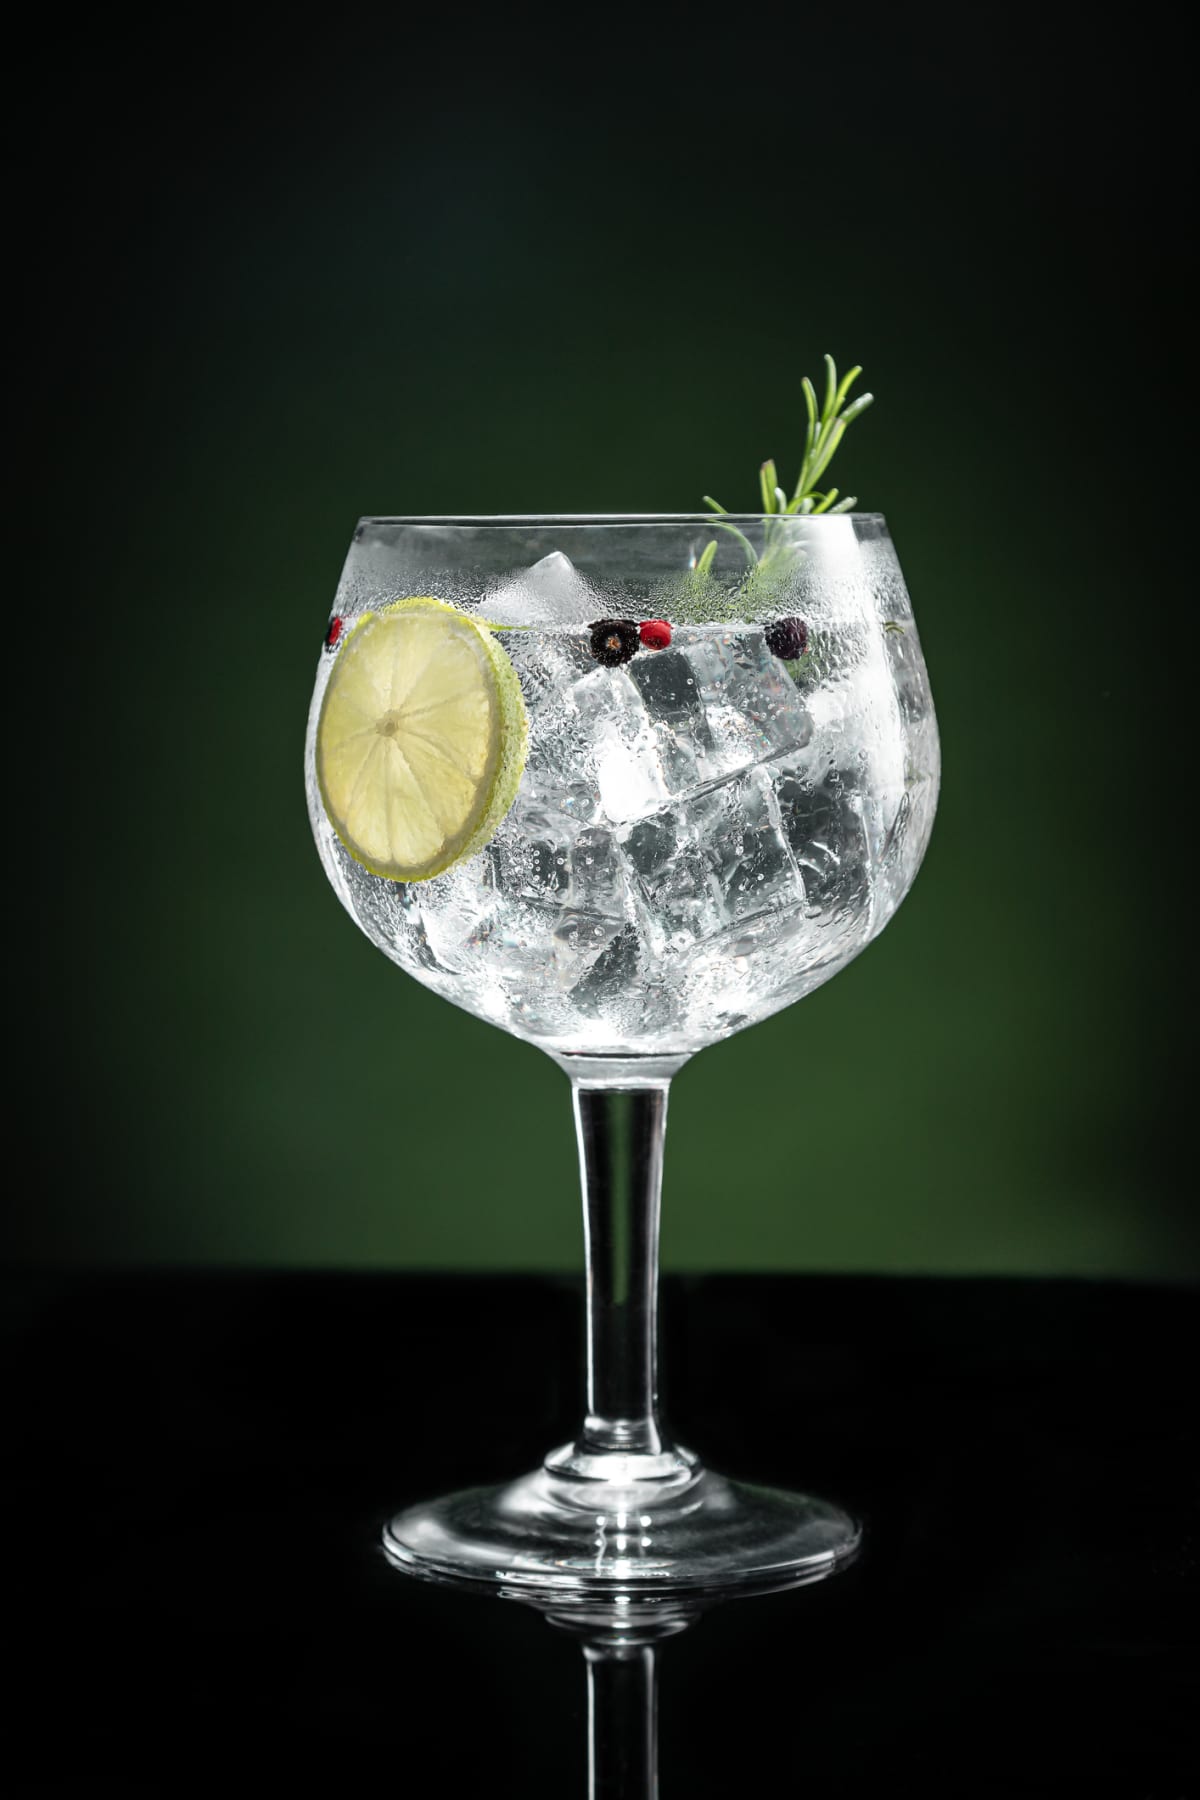 Cold glass of gin tonic with ice and lime, berry, and green garnishes